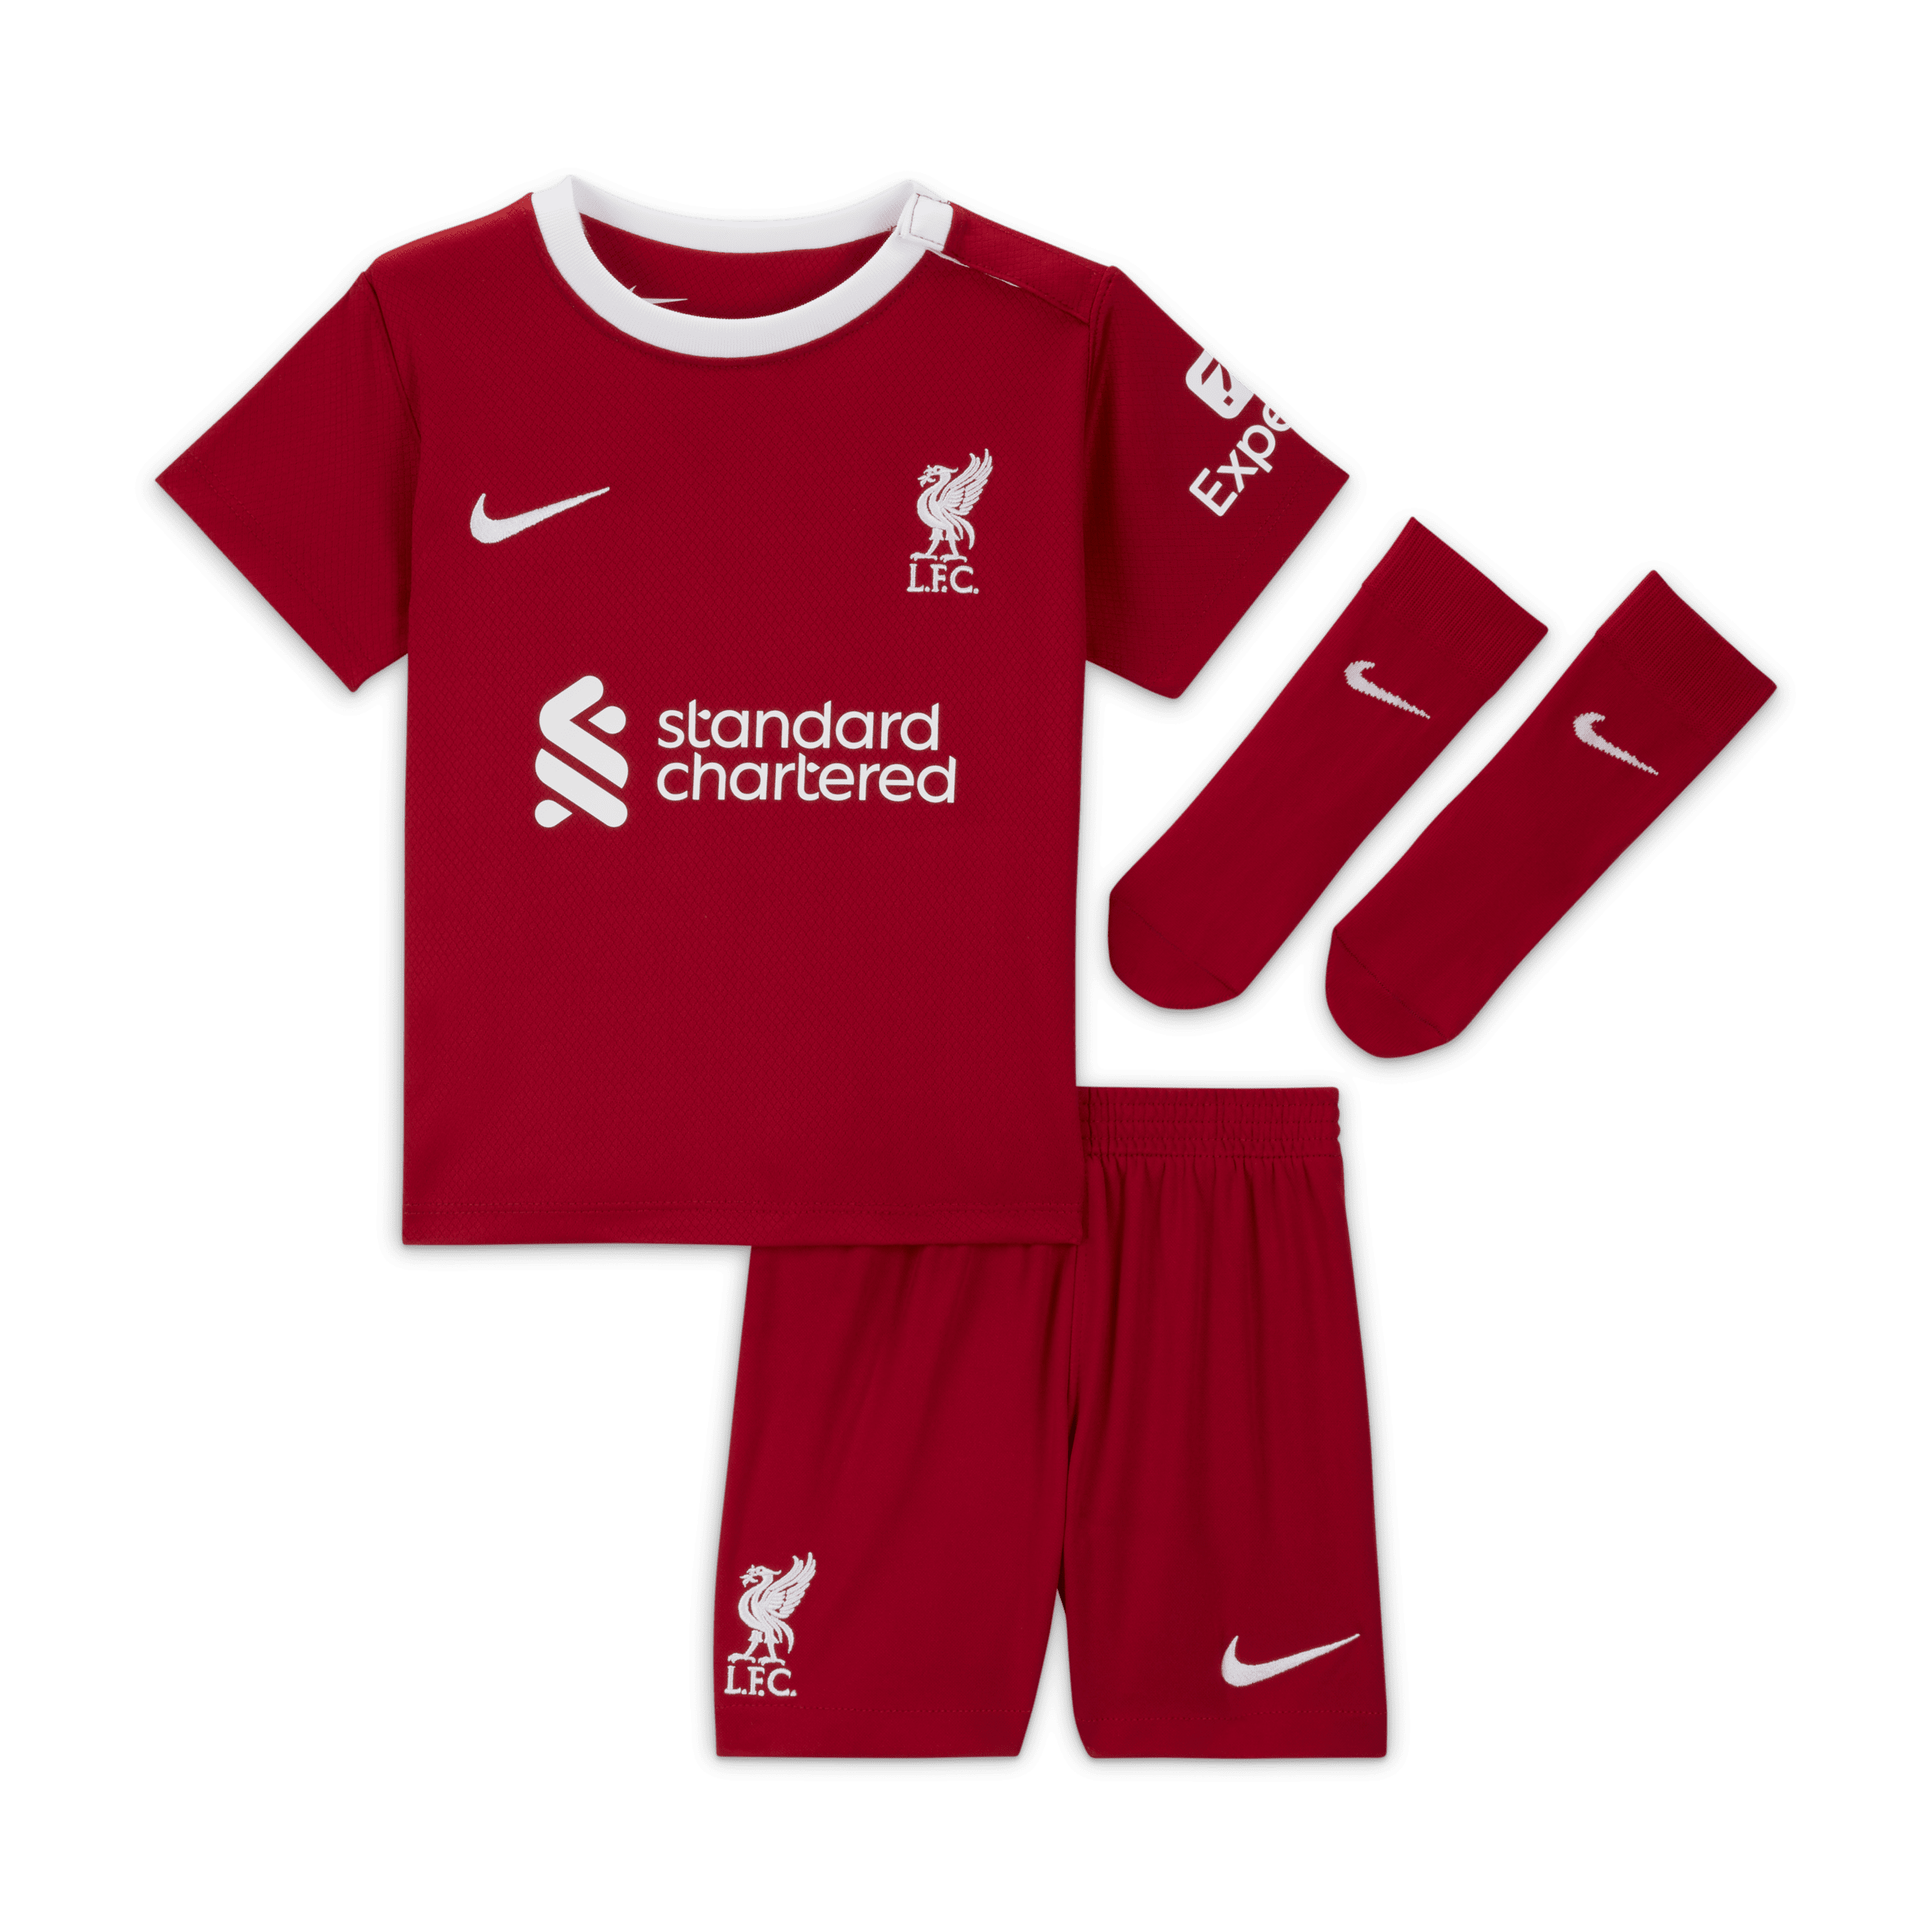 Liverpool FC 2023/24 Thuis Nike Dri-FIT driedelig tenue voor baby's/peuters - Rood